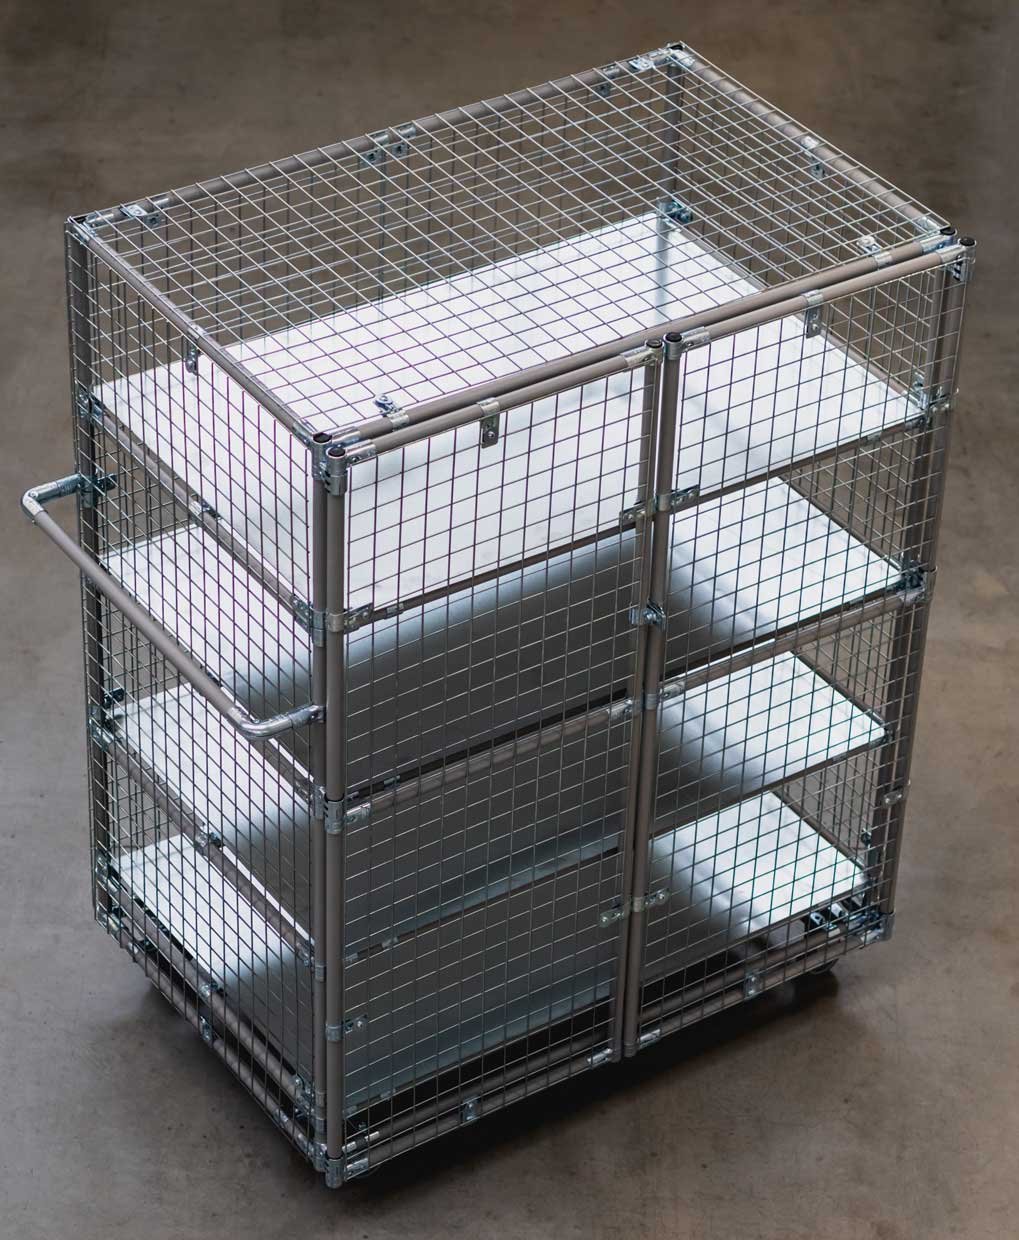 Mobile shelving made of pipe racking system with steel mesh covering and swinging doors